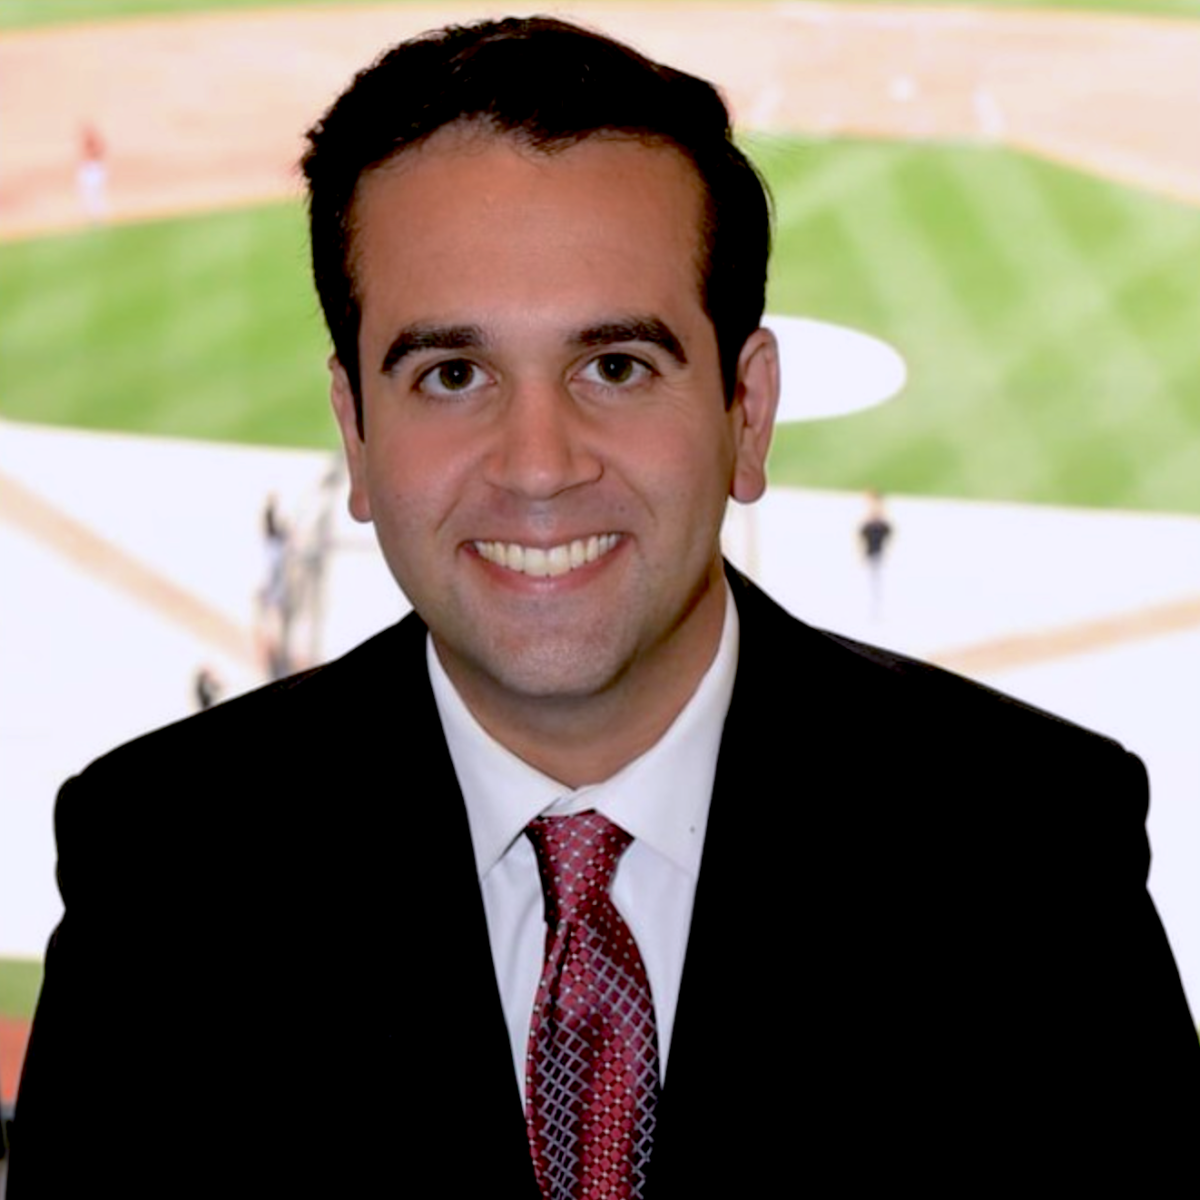 The 10 best baseball announcers who bring the game to life